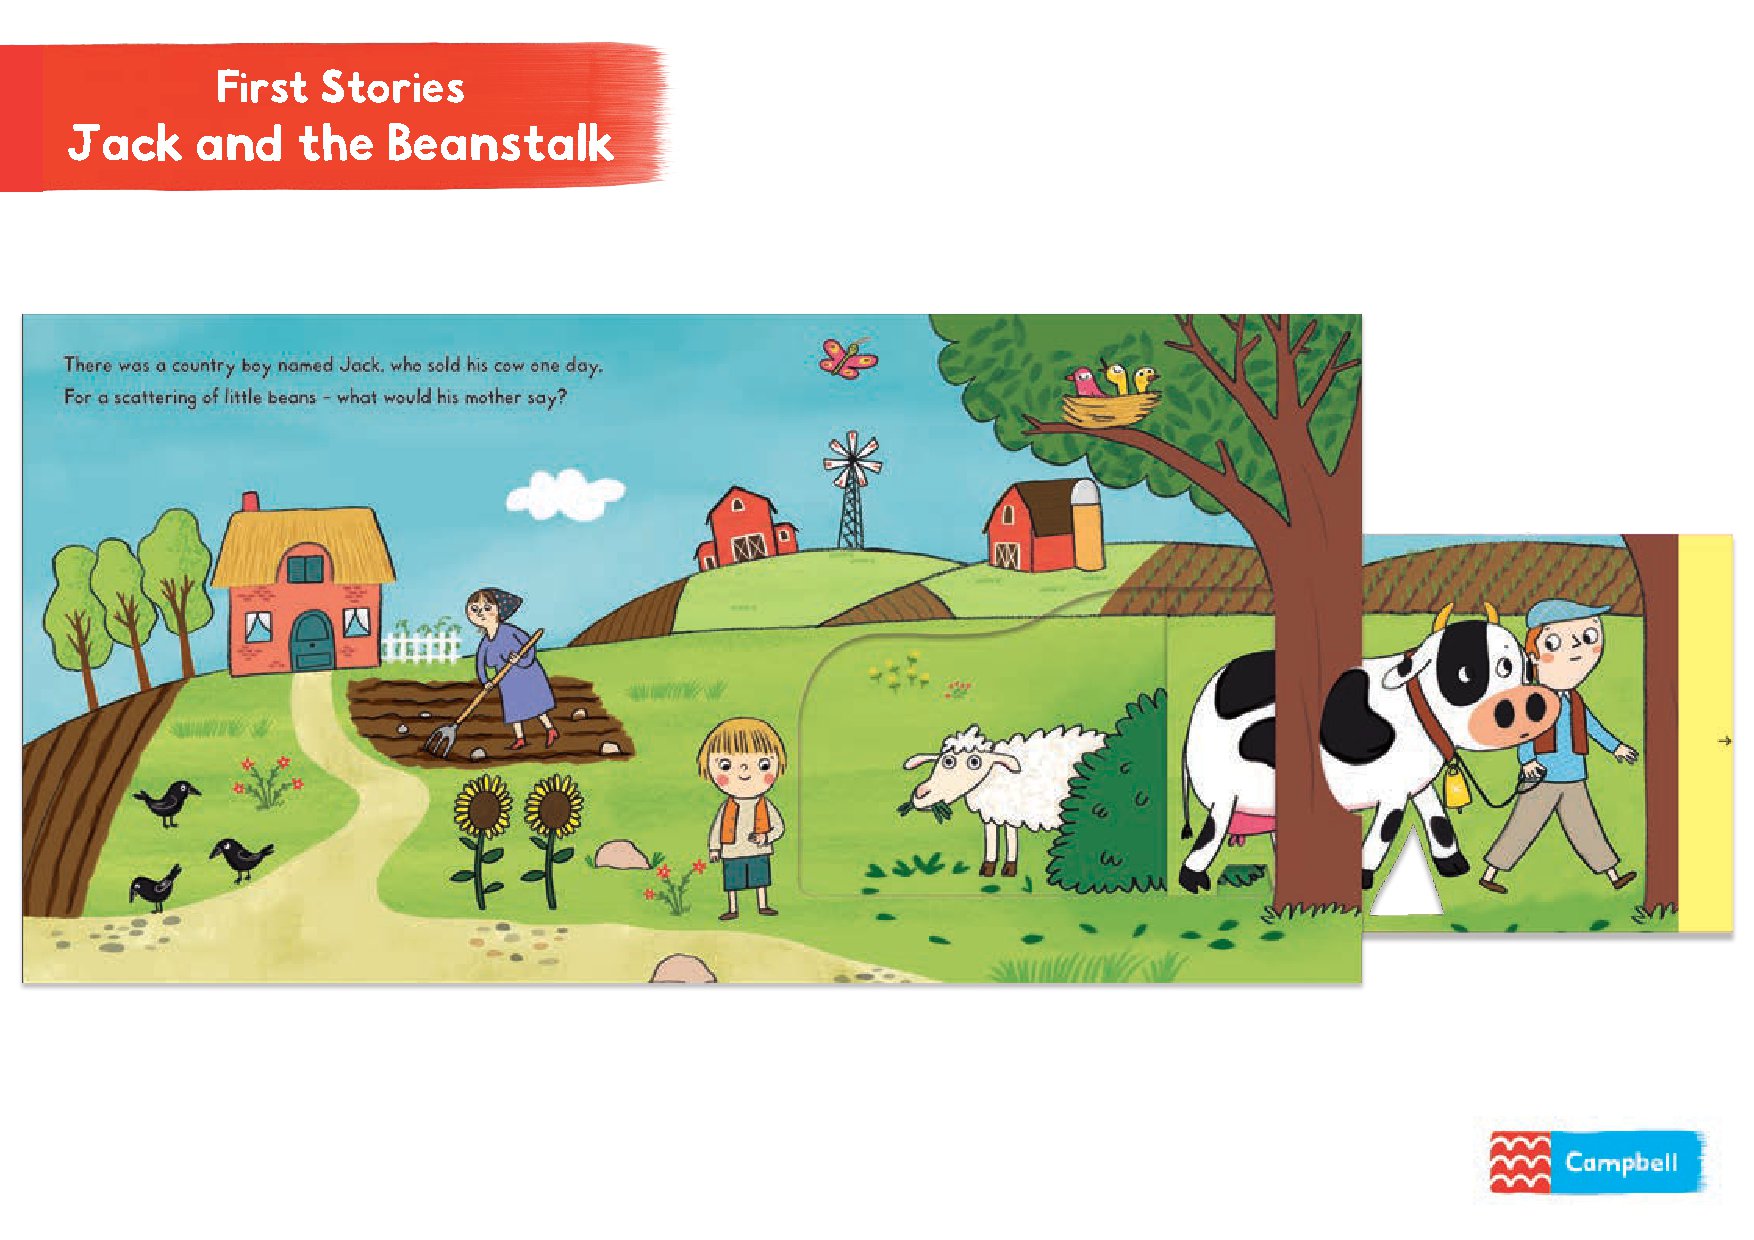 First Stories: Jack and the Beanstalk